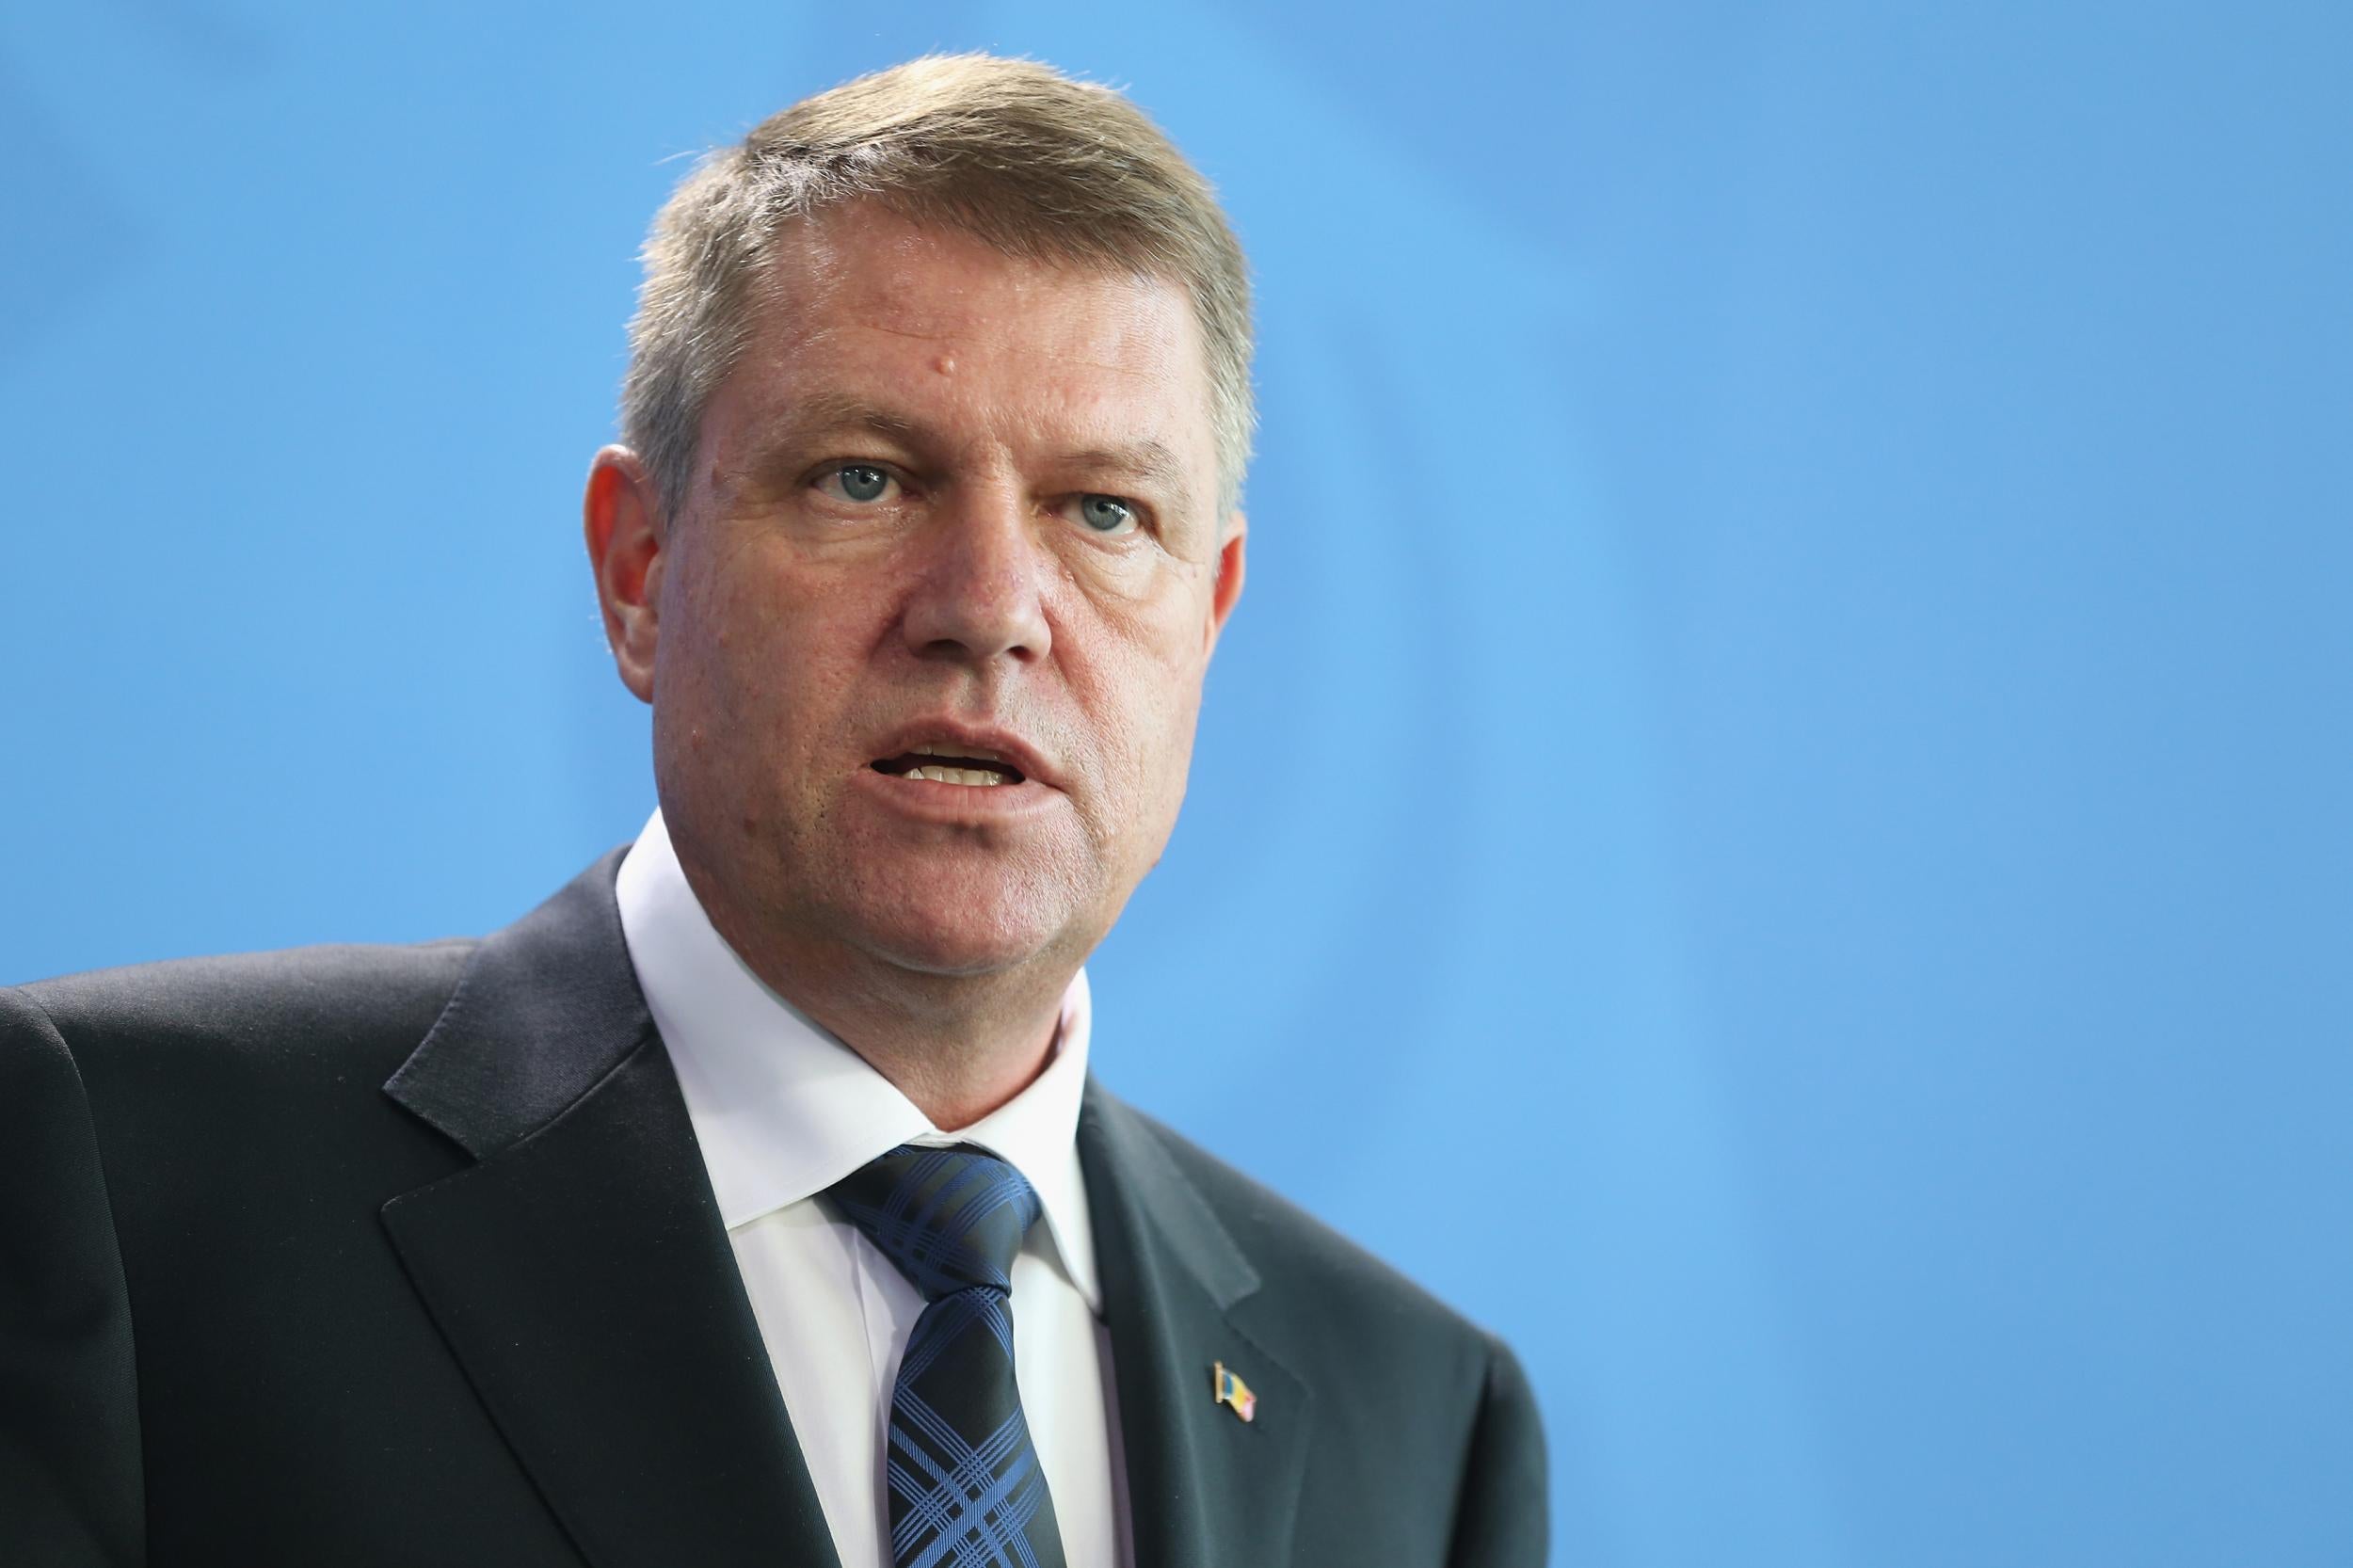 Romanian President Klaus Iohannis issued a statement of condolence shortly after the fire